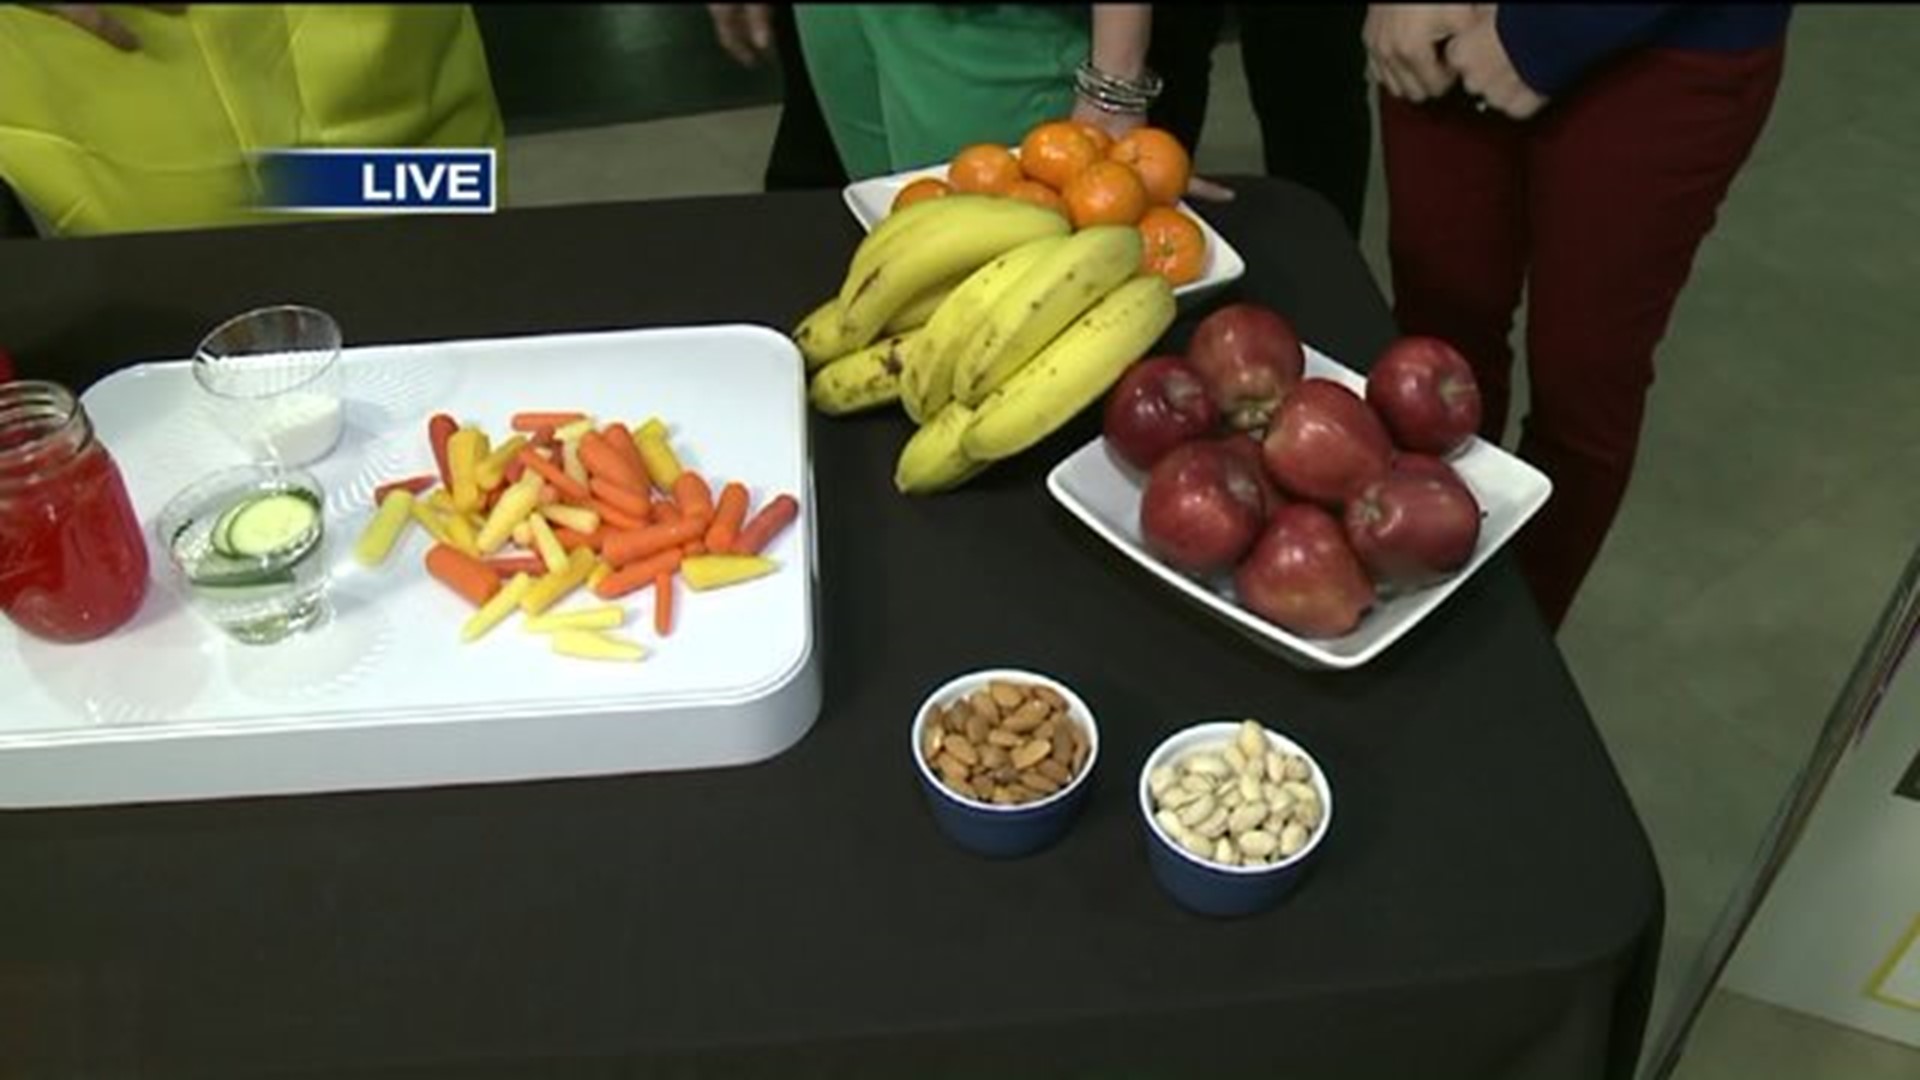 Dietitians Collect Healthy Items for Food Banks